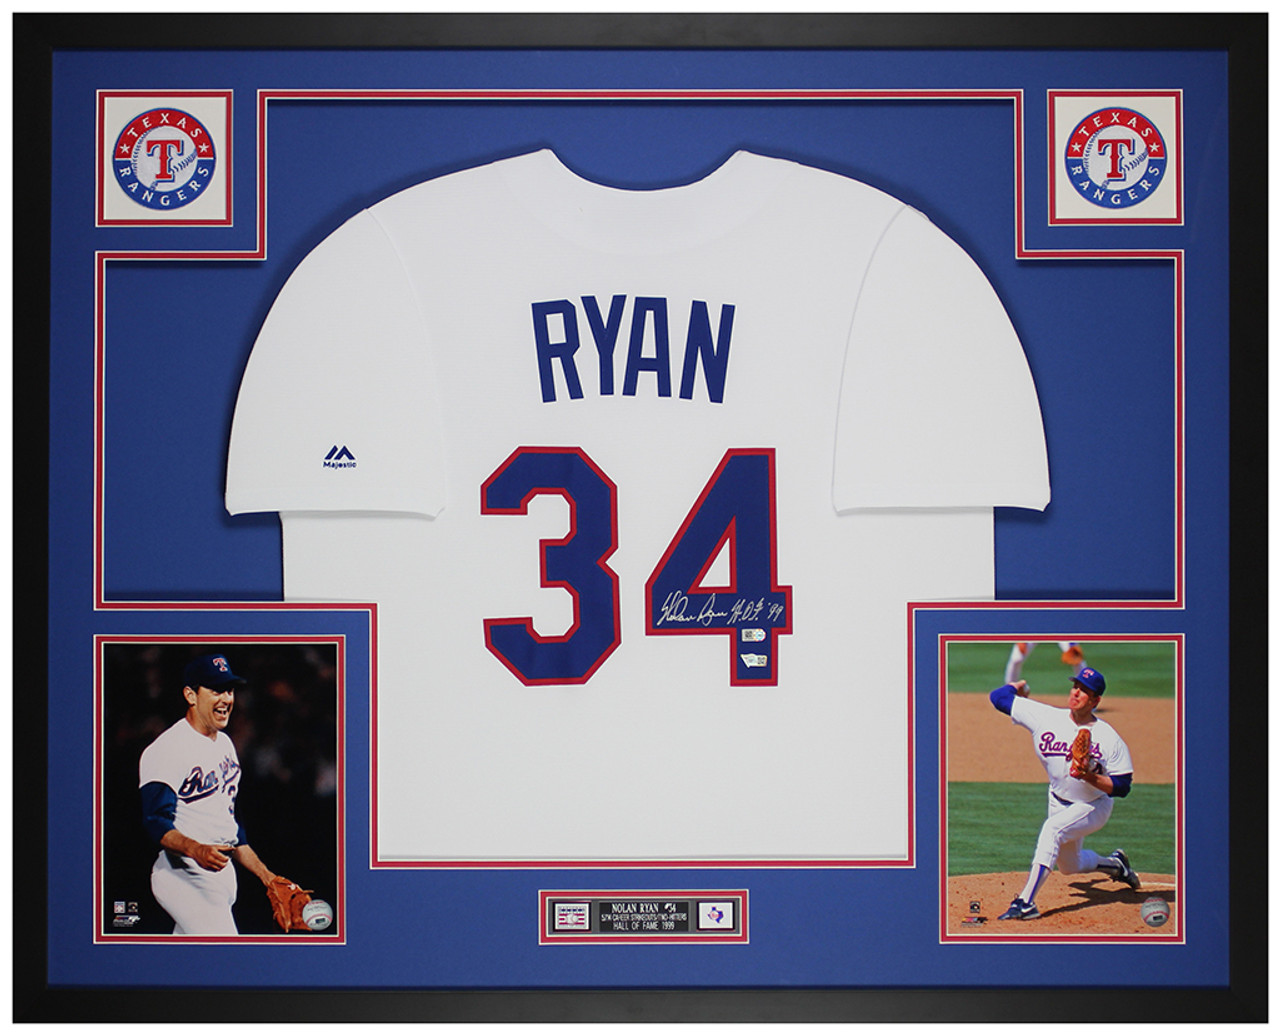 Nolan Ryan Autographed and Framed Houston Astros Jersey